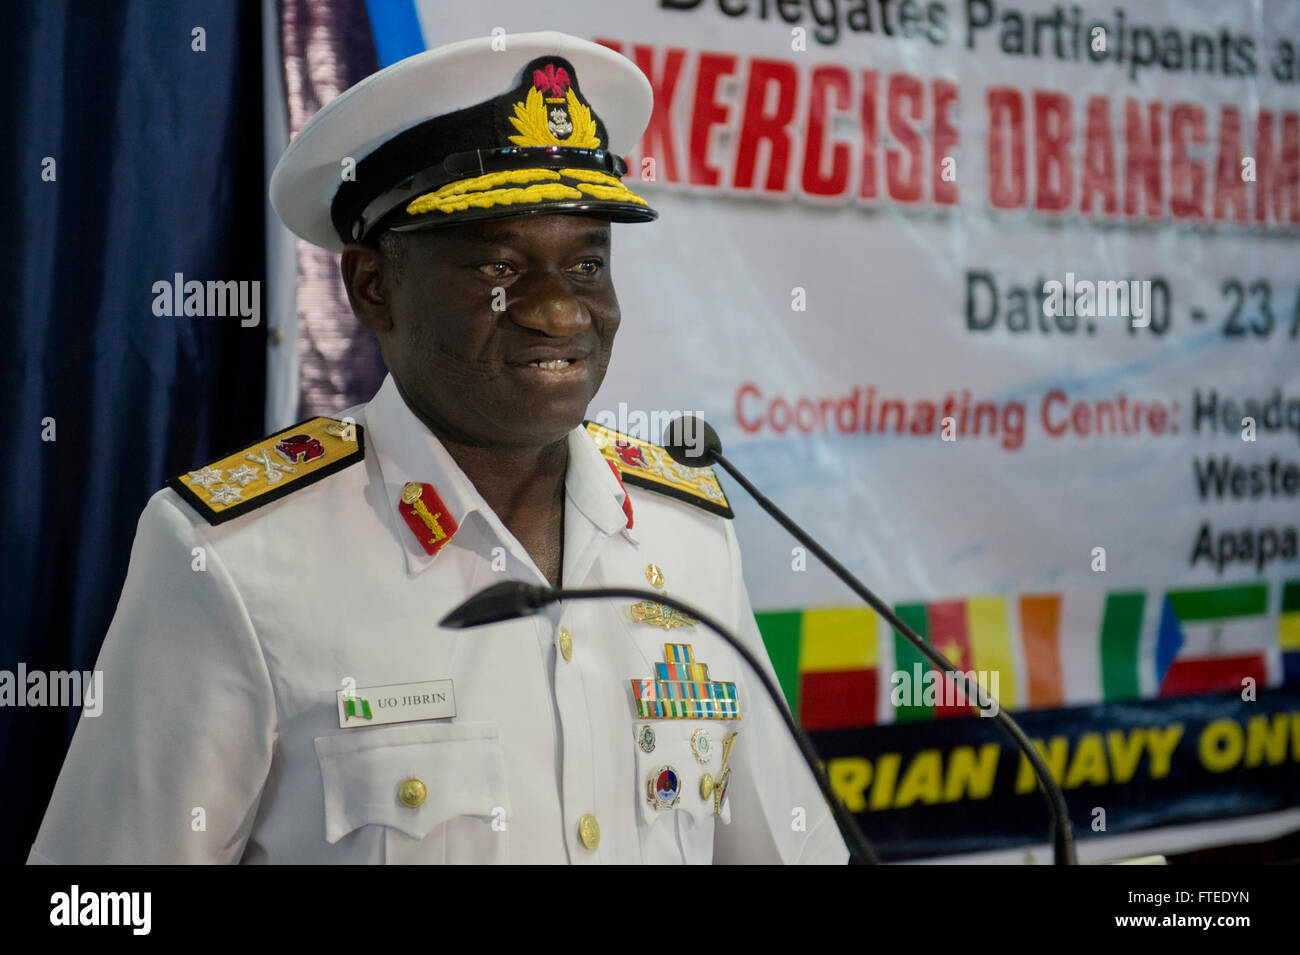 140423-N-IY142-181 LAGOS, Nigeria (April 23, 2014) - Vice Adm. U.O. Jibrin, Chief of the Naval Staff, Nigerian navy, delivers remarks during the closing ceremony of Obangame Express 2014 at the country’s Western Naval Command headquarters. Obangame Express is a U.S. Africa Command-sponsored multinational maritime exercise designed to increase maritime safety and security in the Gulf of Guinea. (U.S. Navy photo by Mass Communication Specialist 2nd Class John Herman/Released) Stock Photo